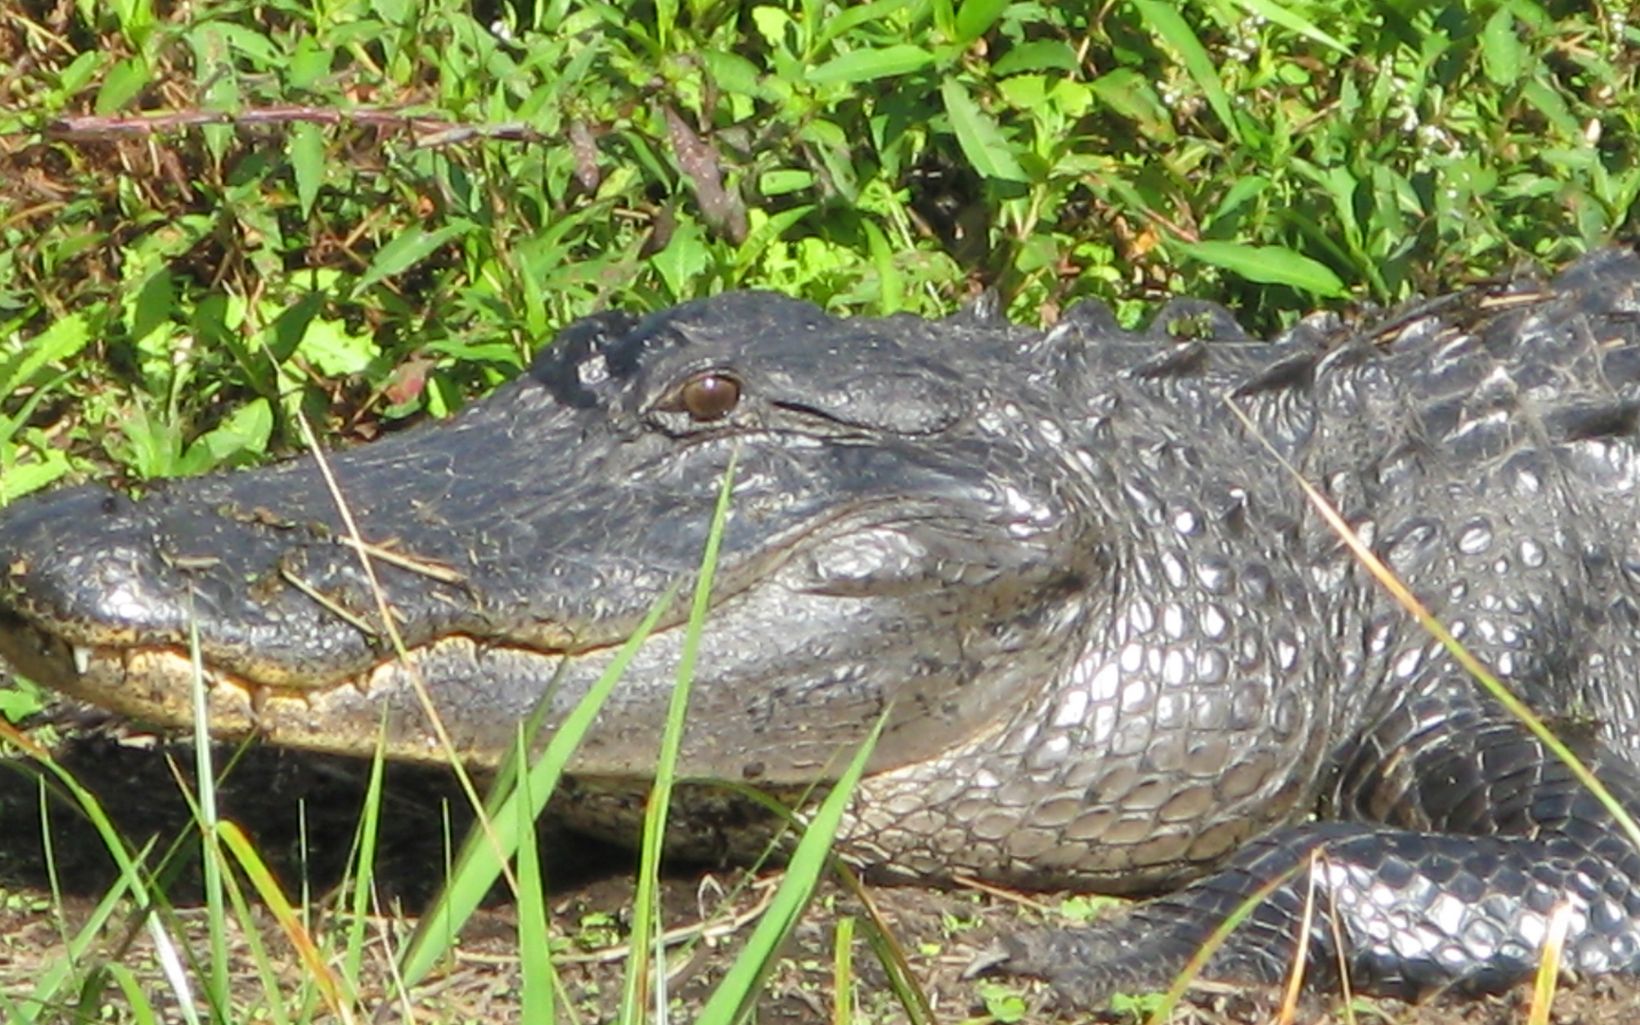 A closeup of an American alligator sunning itself at Rafter T Ranch.